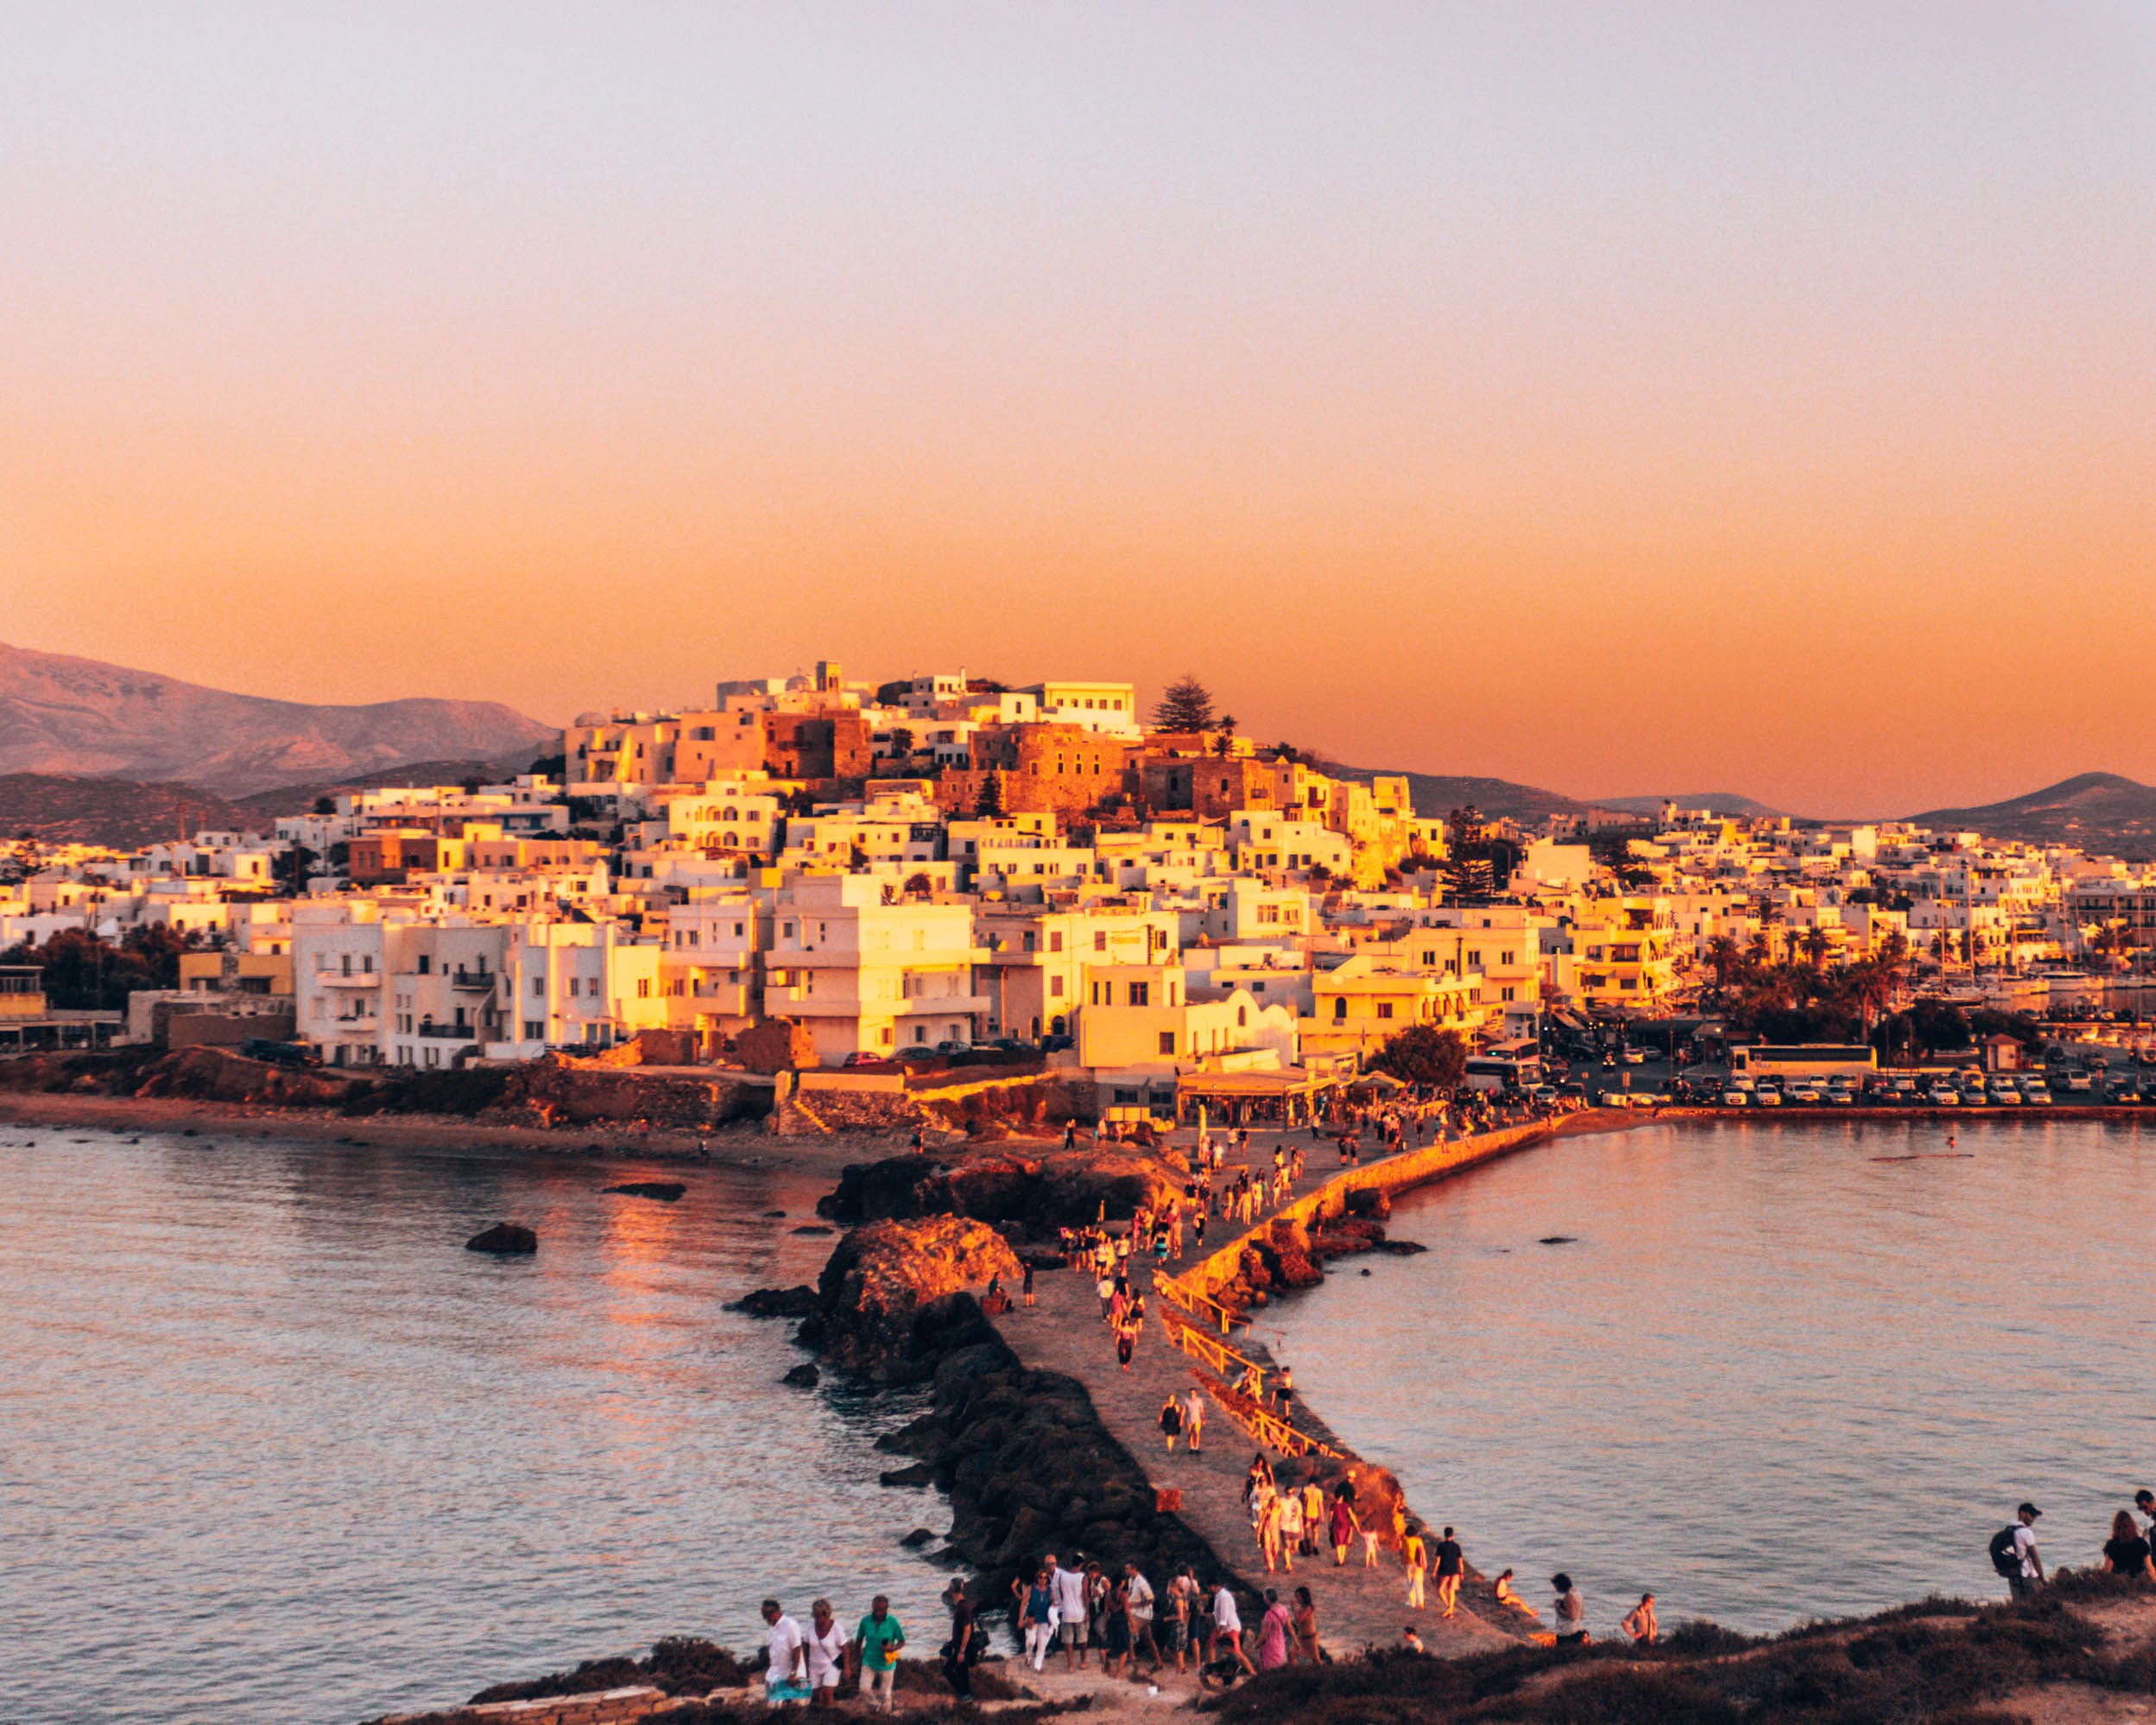 Sunset in Naxos Greece, over the old town of Chora